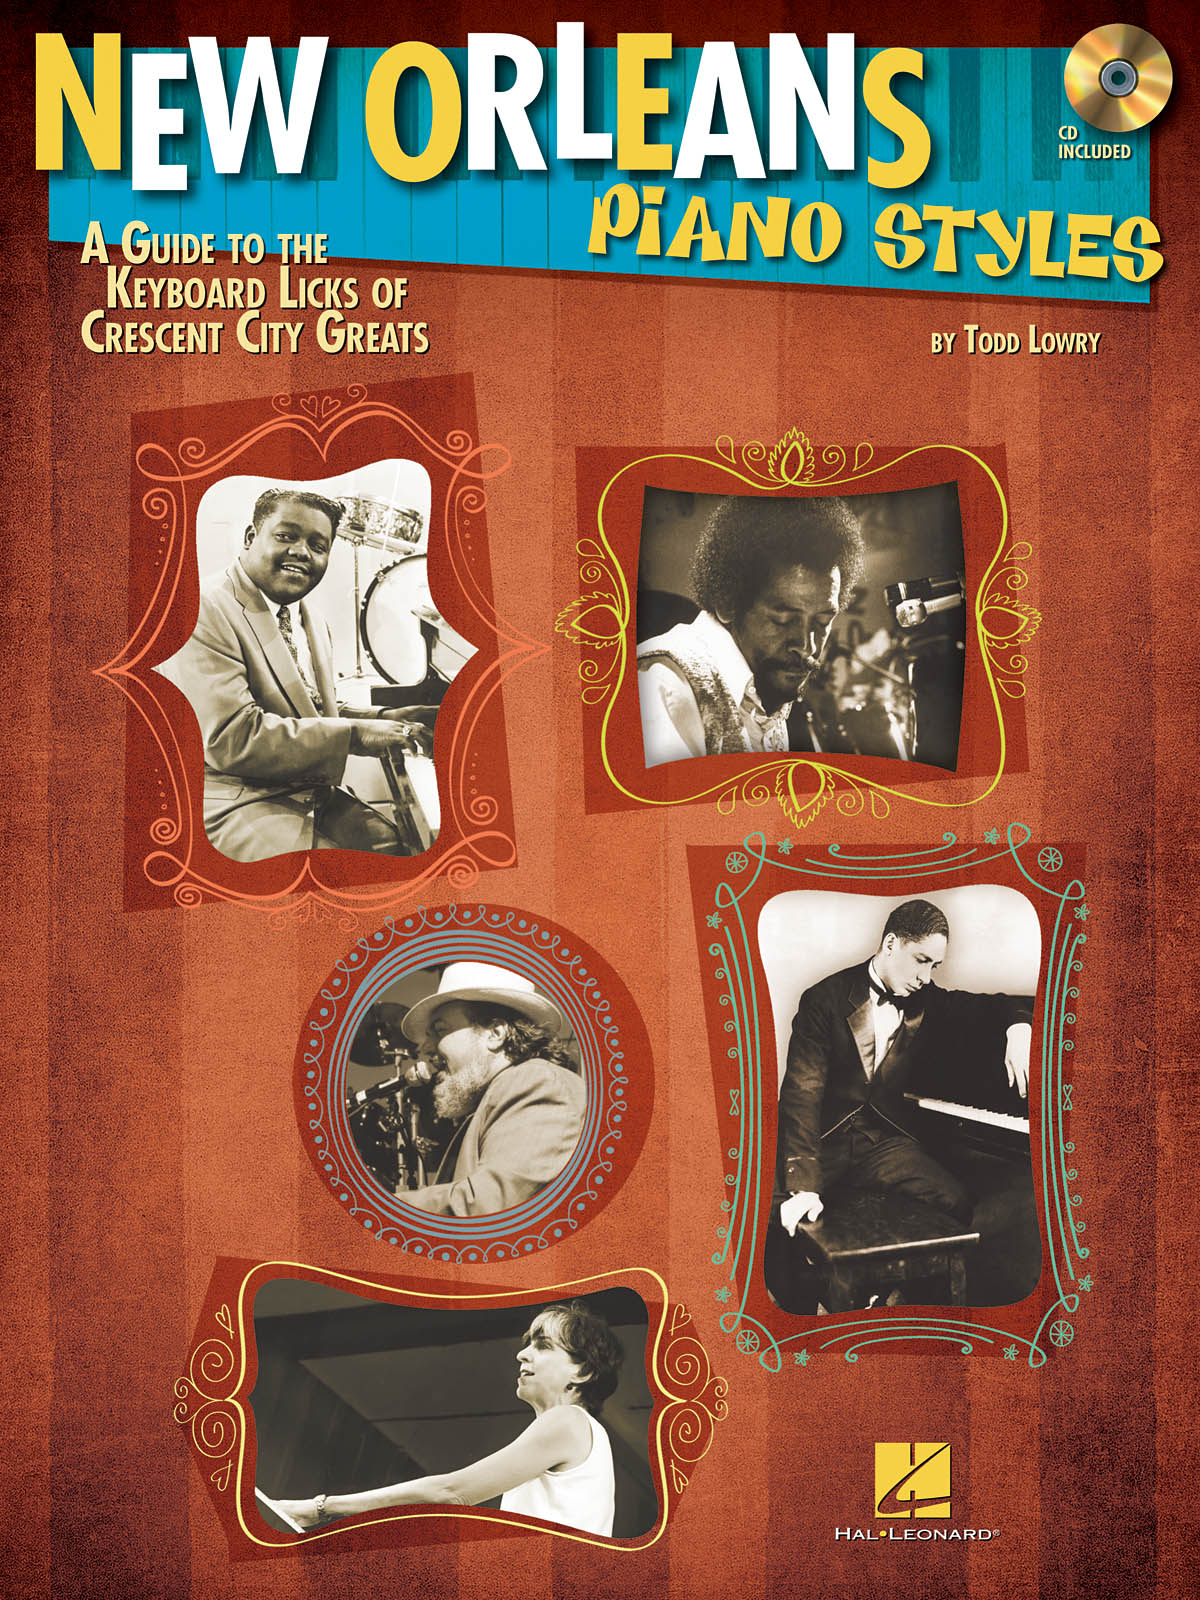 New Orleans Piano Styles - A Guide to the Keyboard Licks of Crescent City Greats - noty na klavír